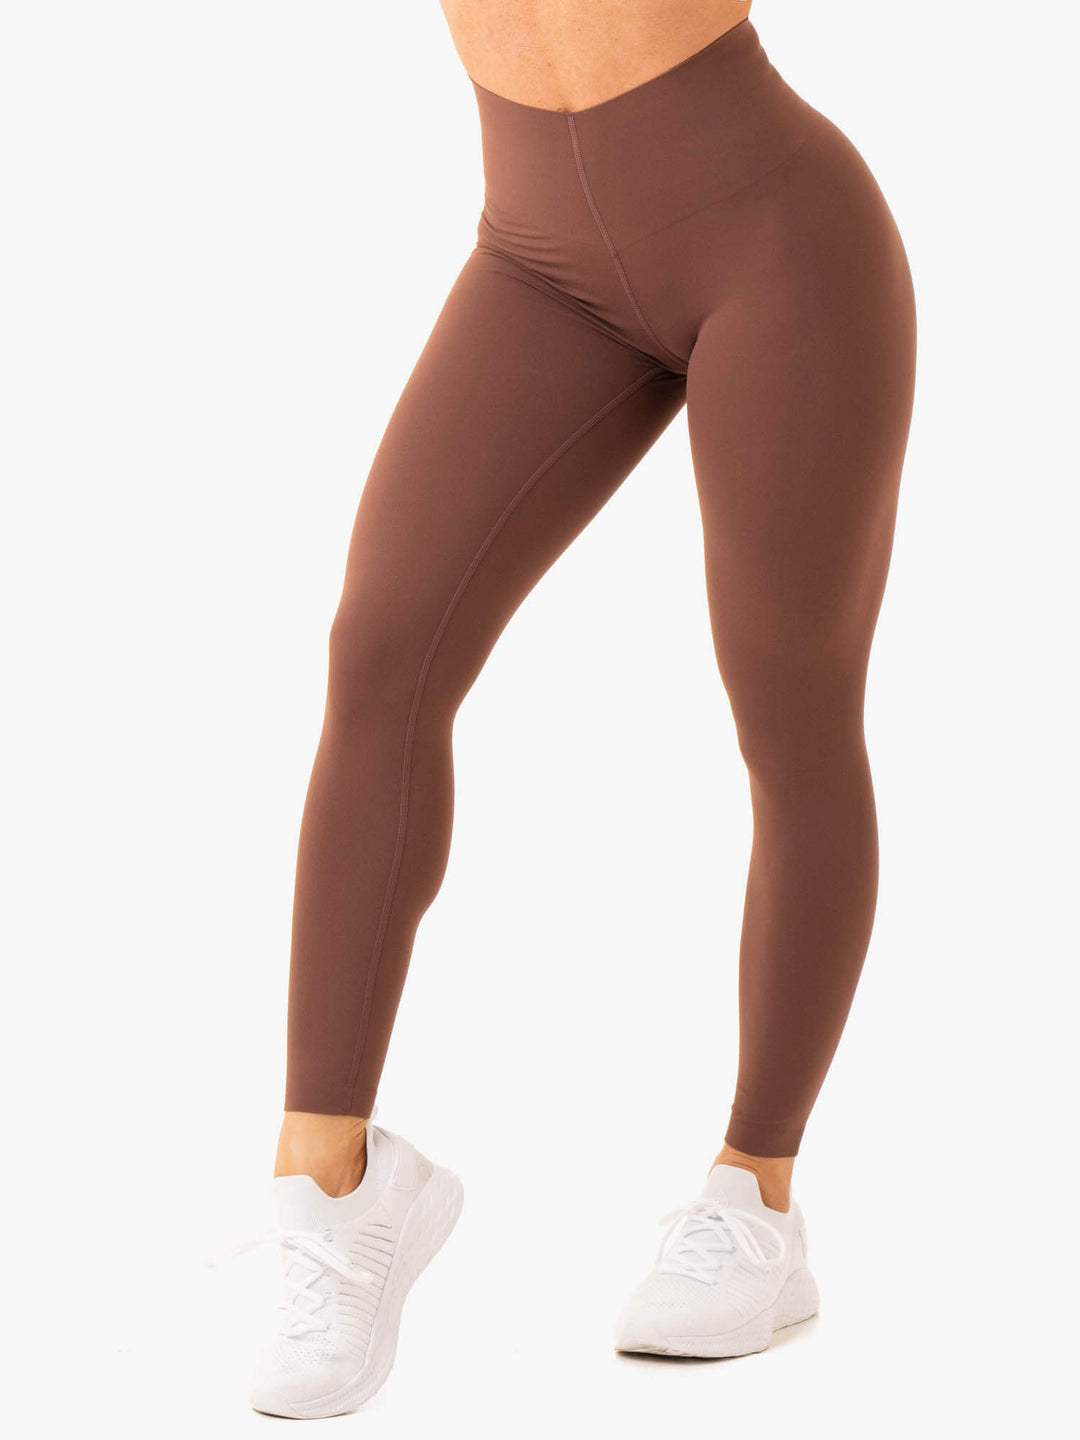 Extend Compression Leggings - Chocolate Clothing Ryderwear 